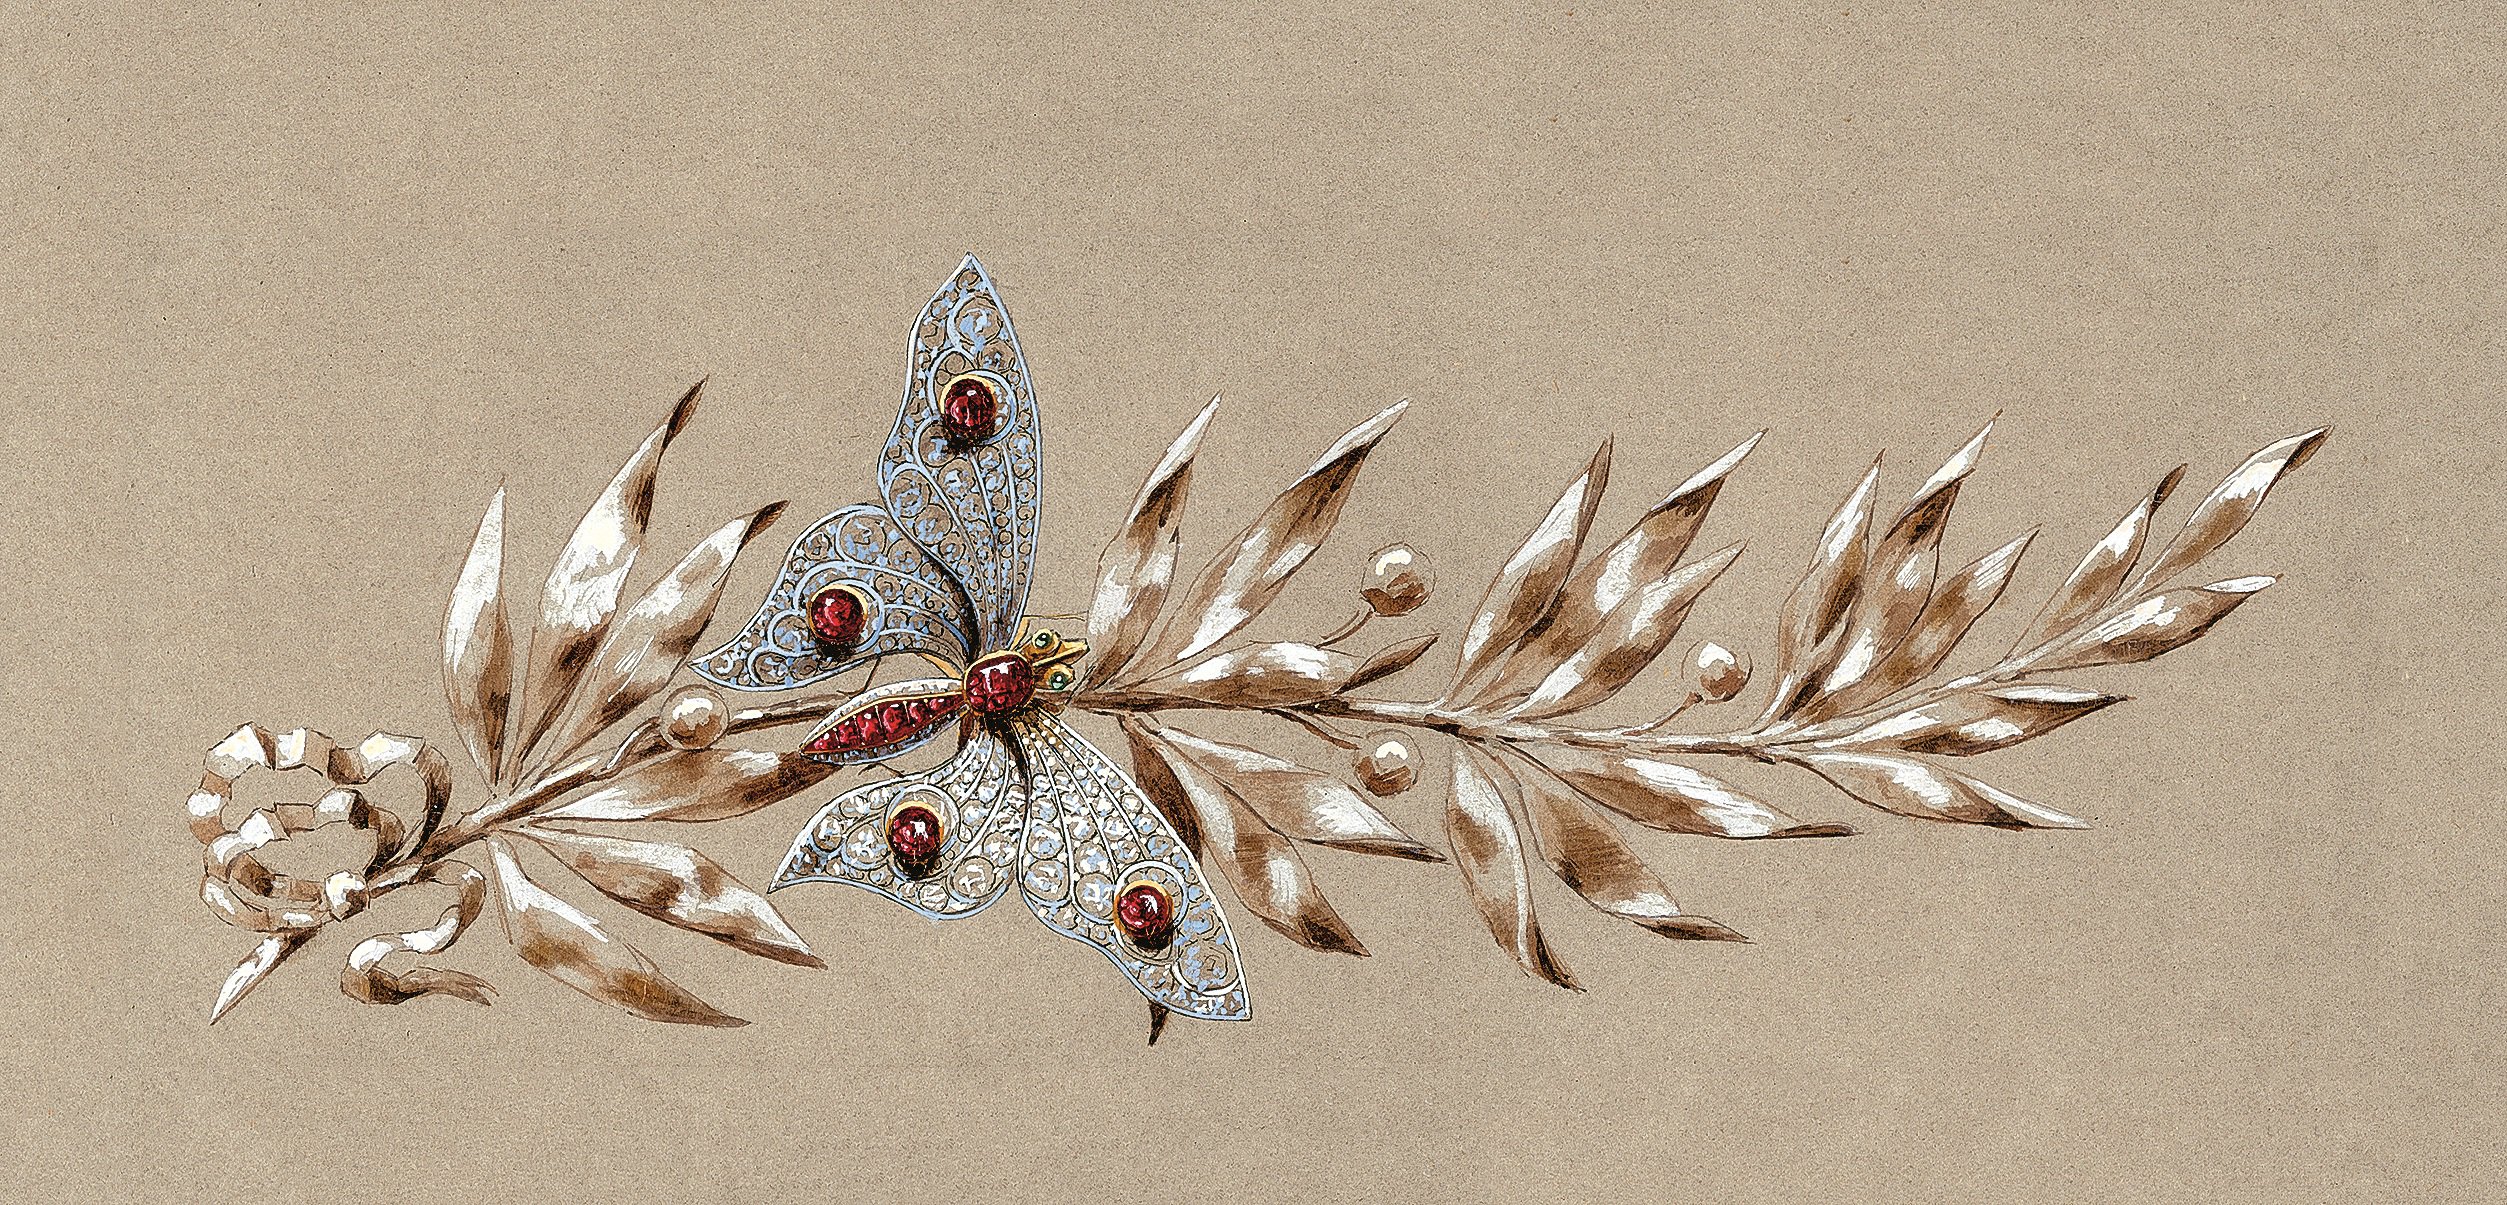 Preparatory sketch of a butterfly and laurel branch brooch